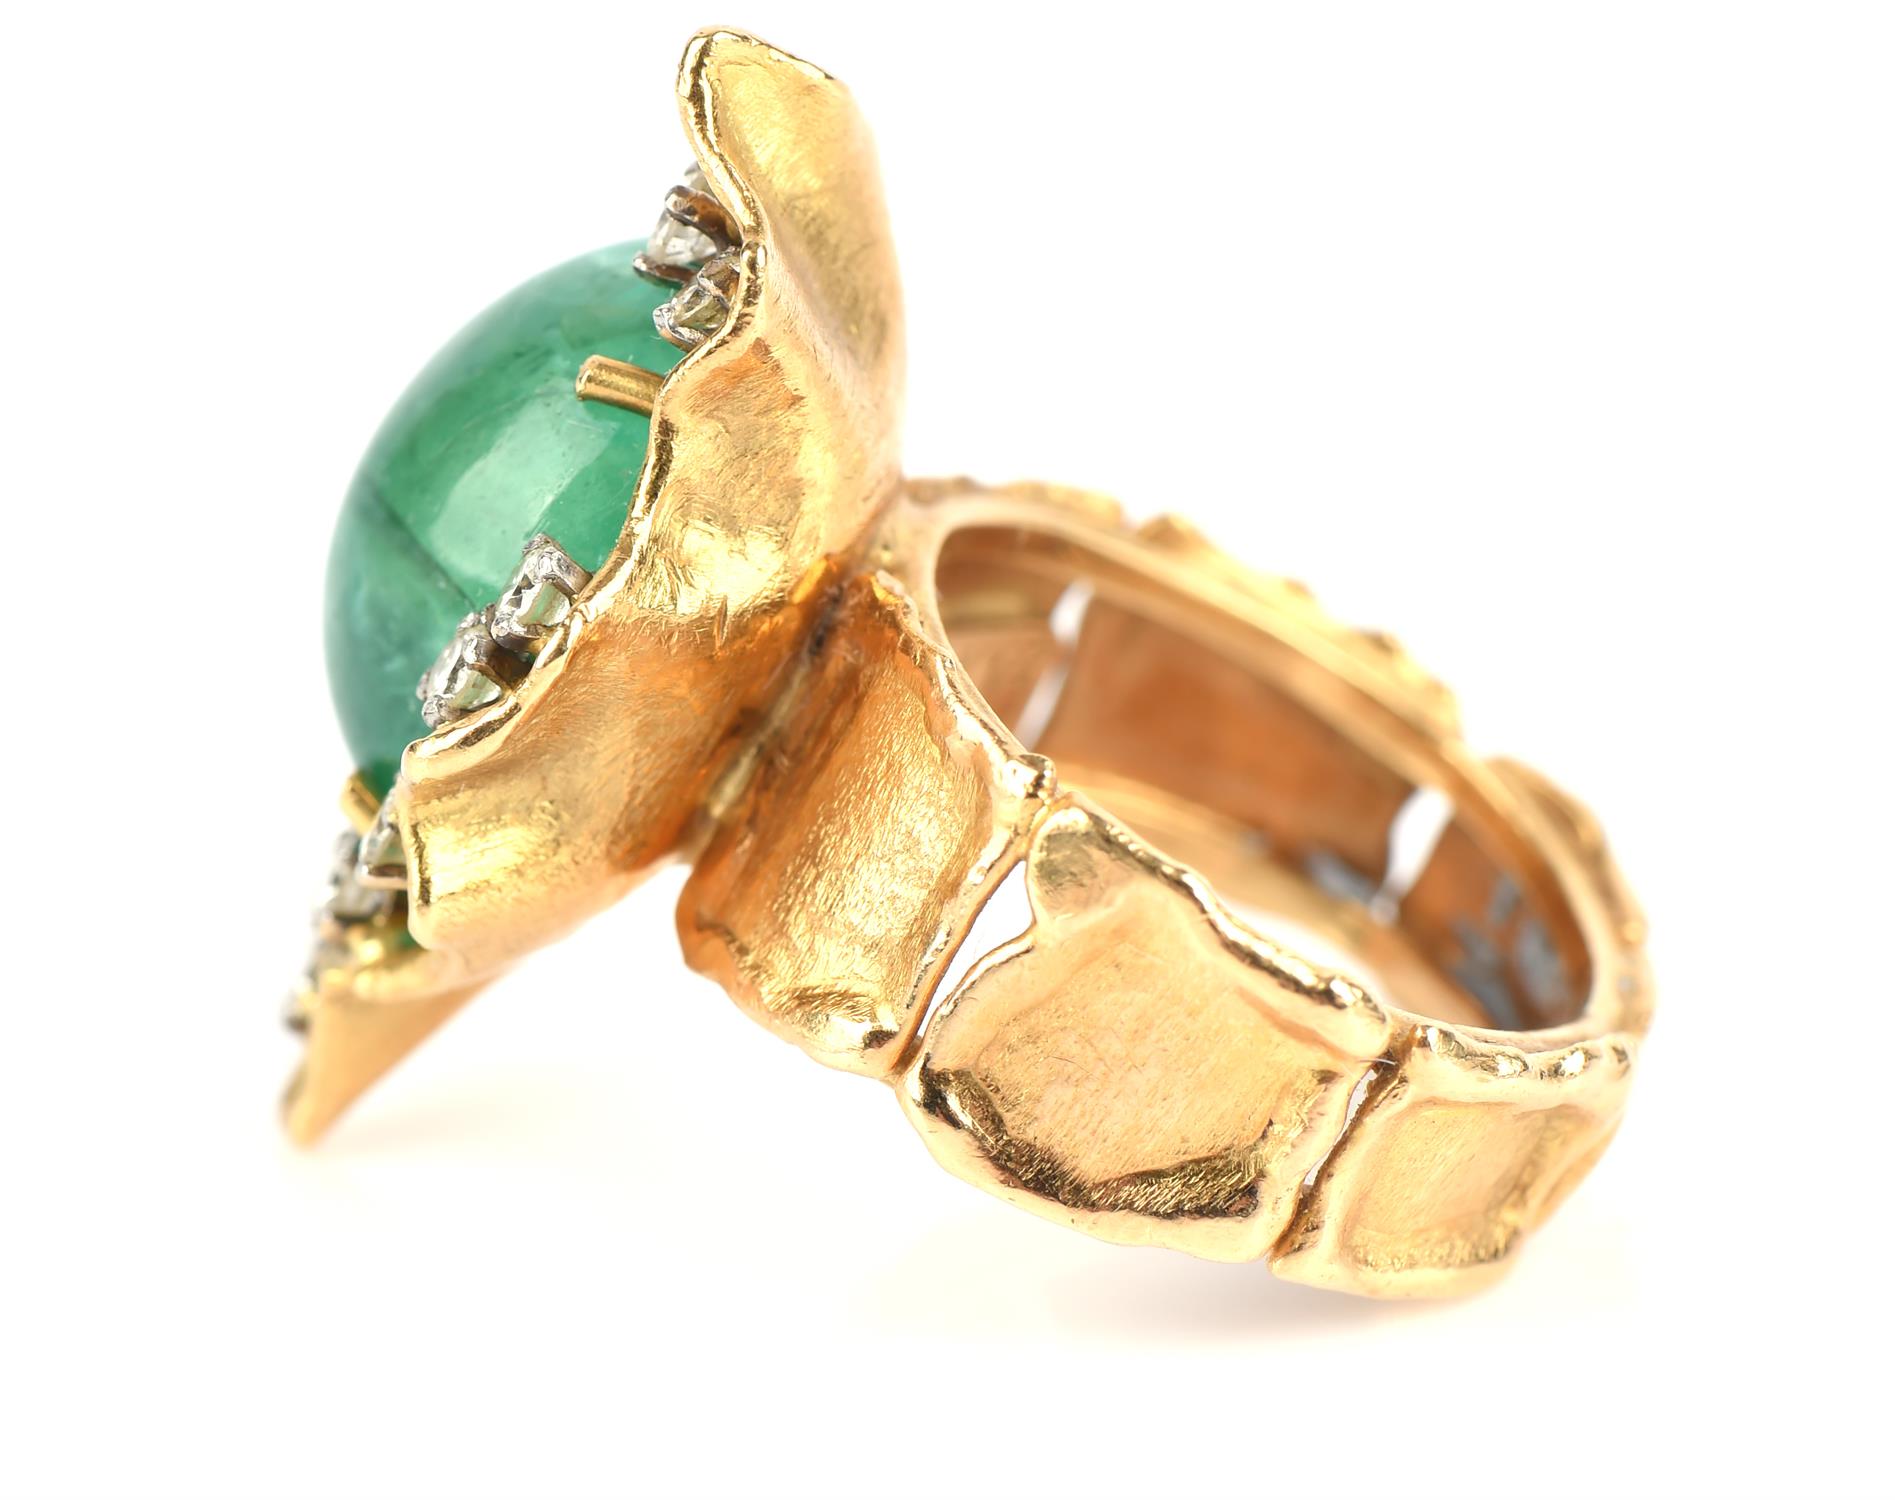 George Weil vintage emerald dress ring, central oval cabochon cut emerald estimated weight 13. - Image 3 of 6